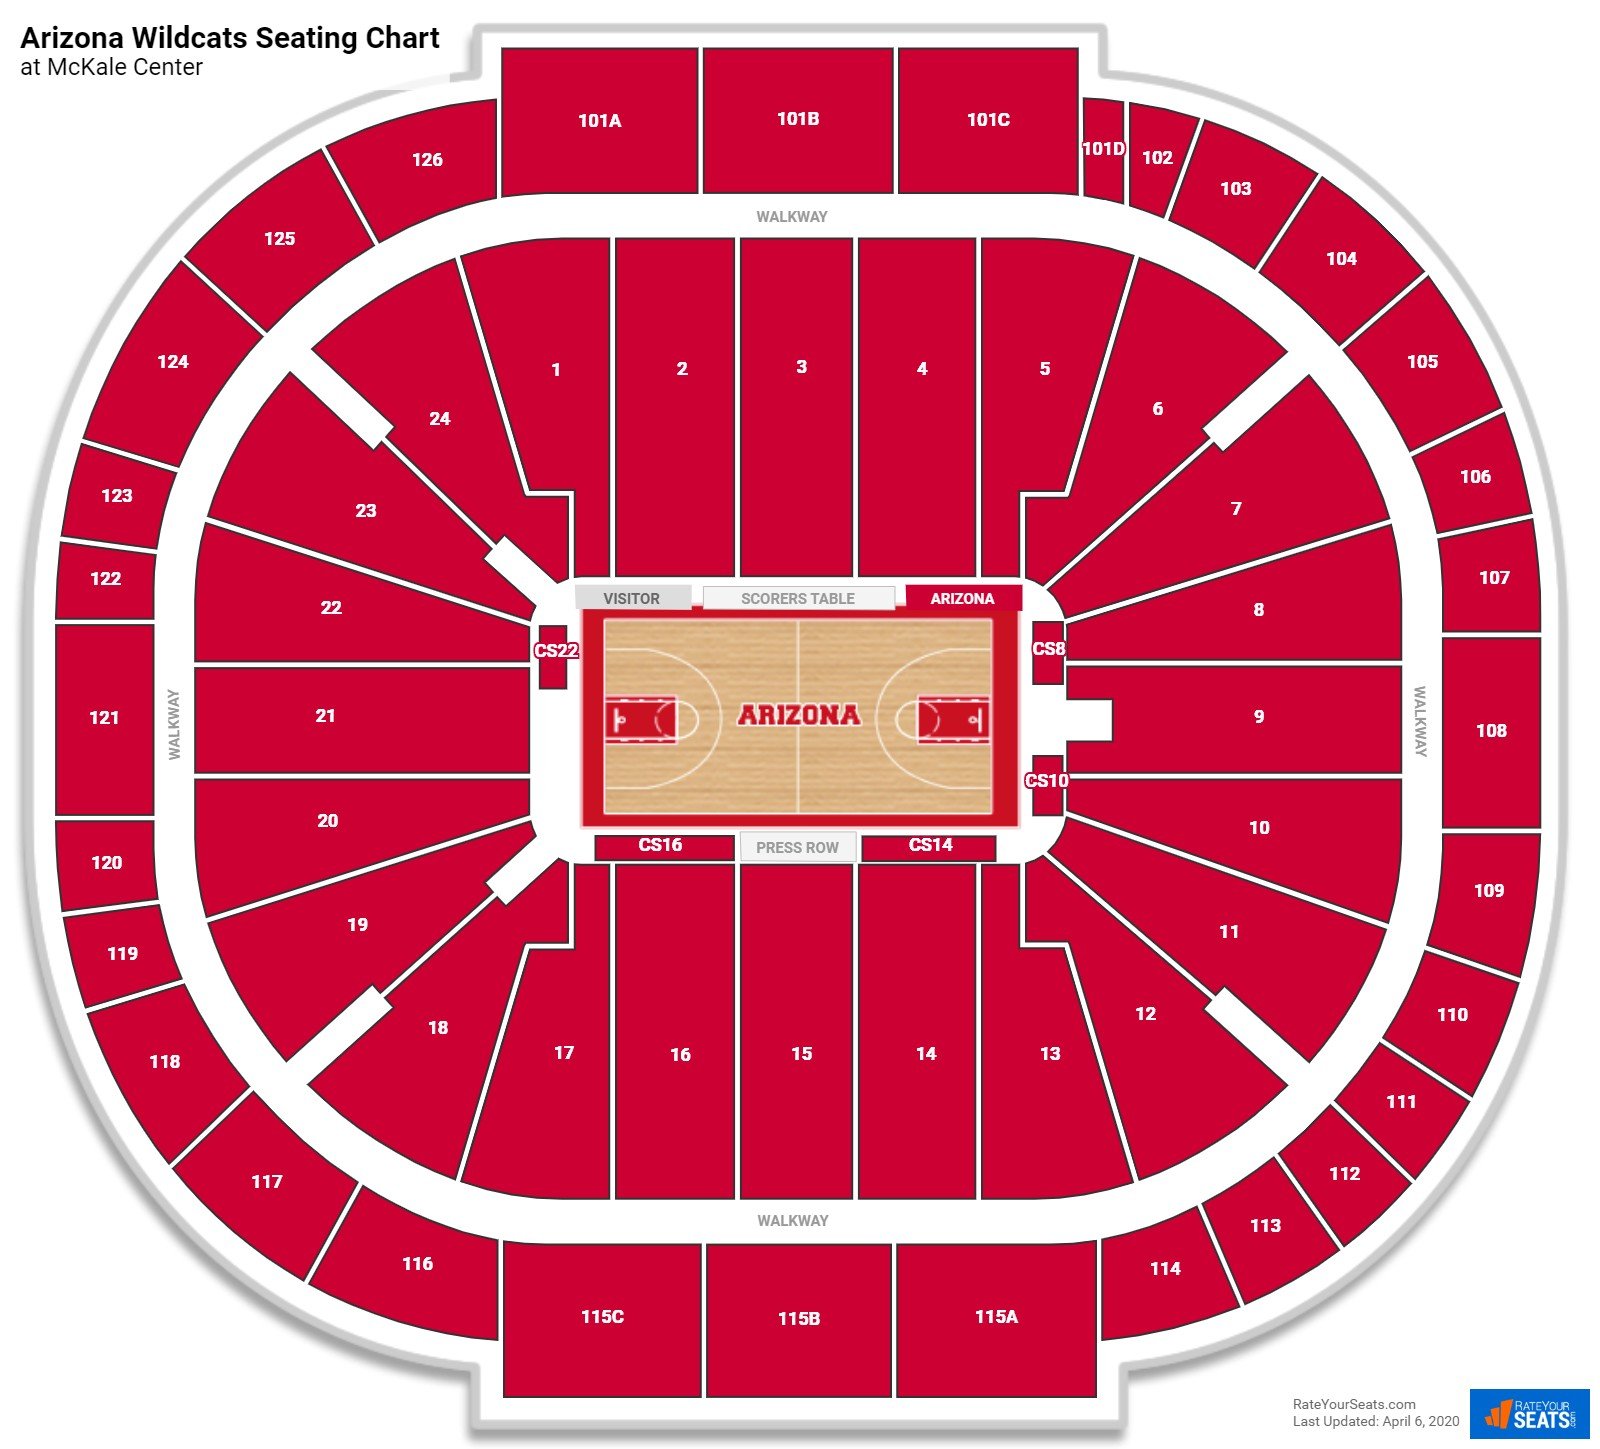 Mckale Center Seating Charts